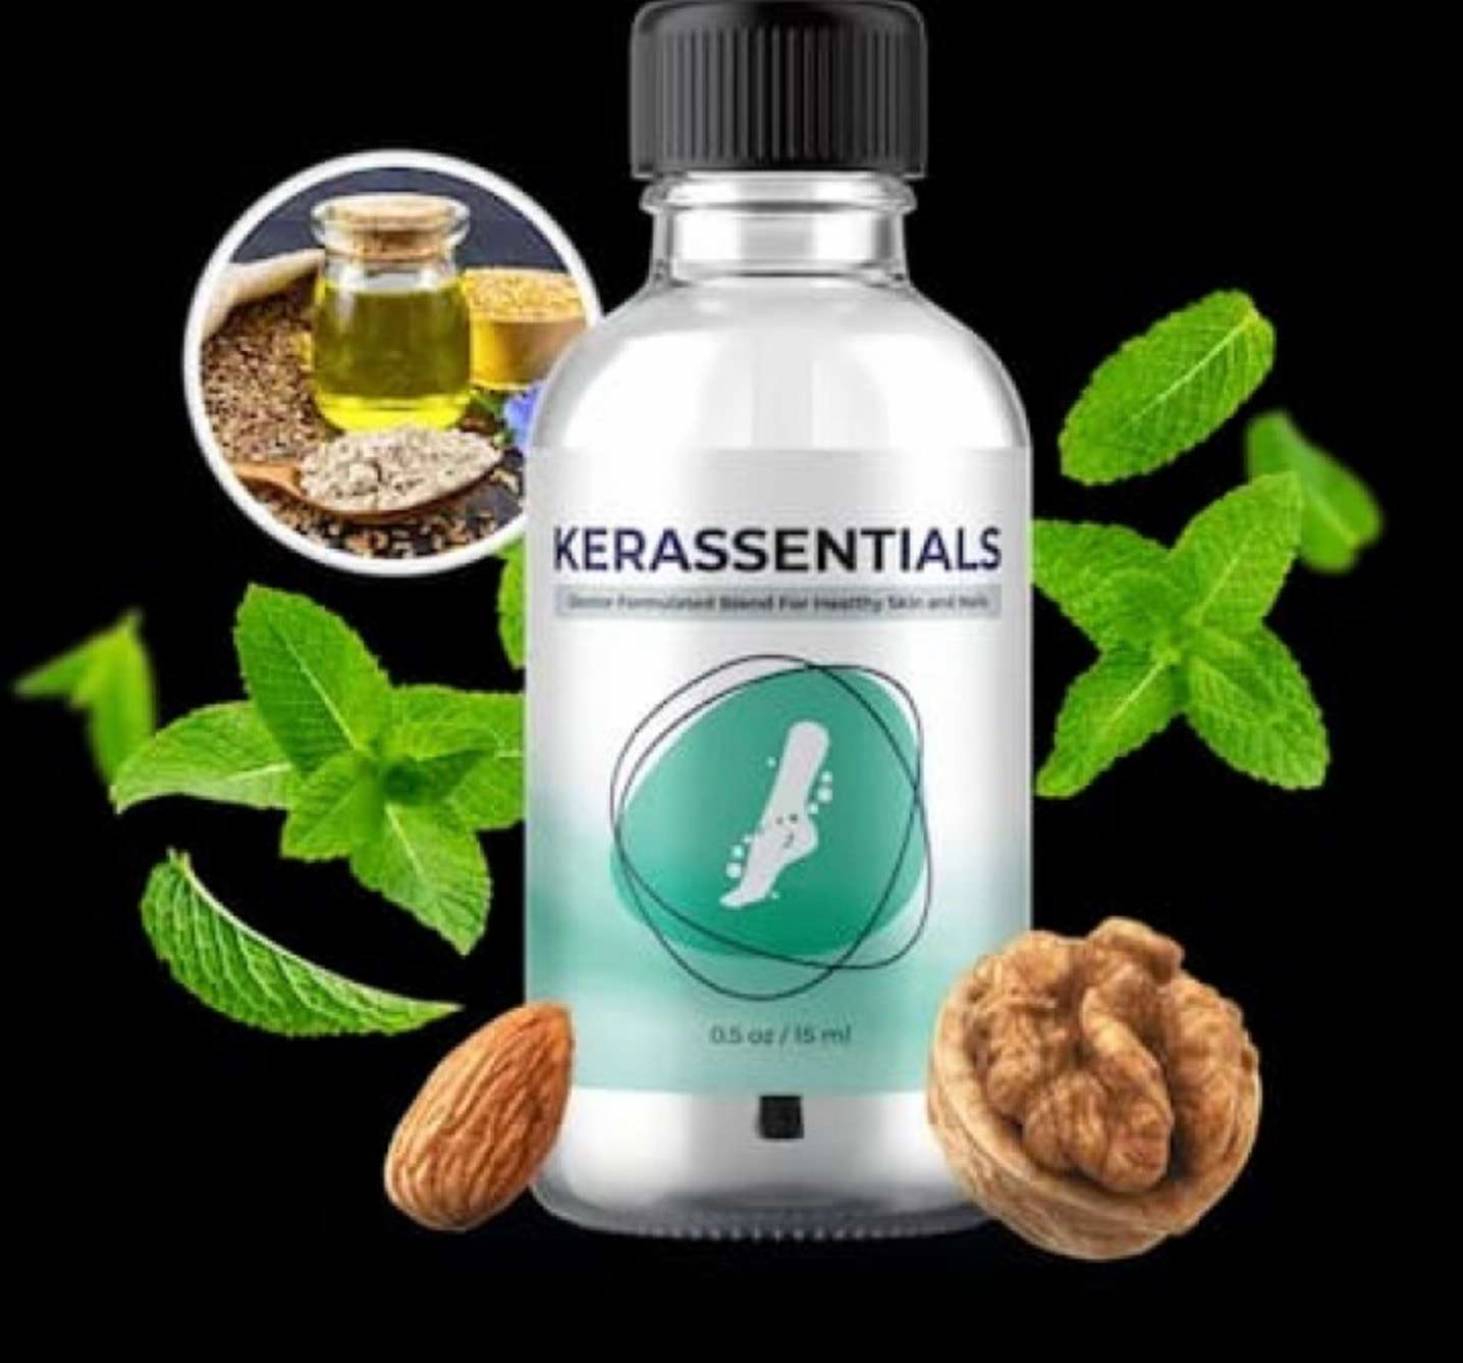 Is Kerassentials Fda Approved